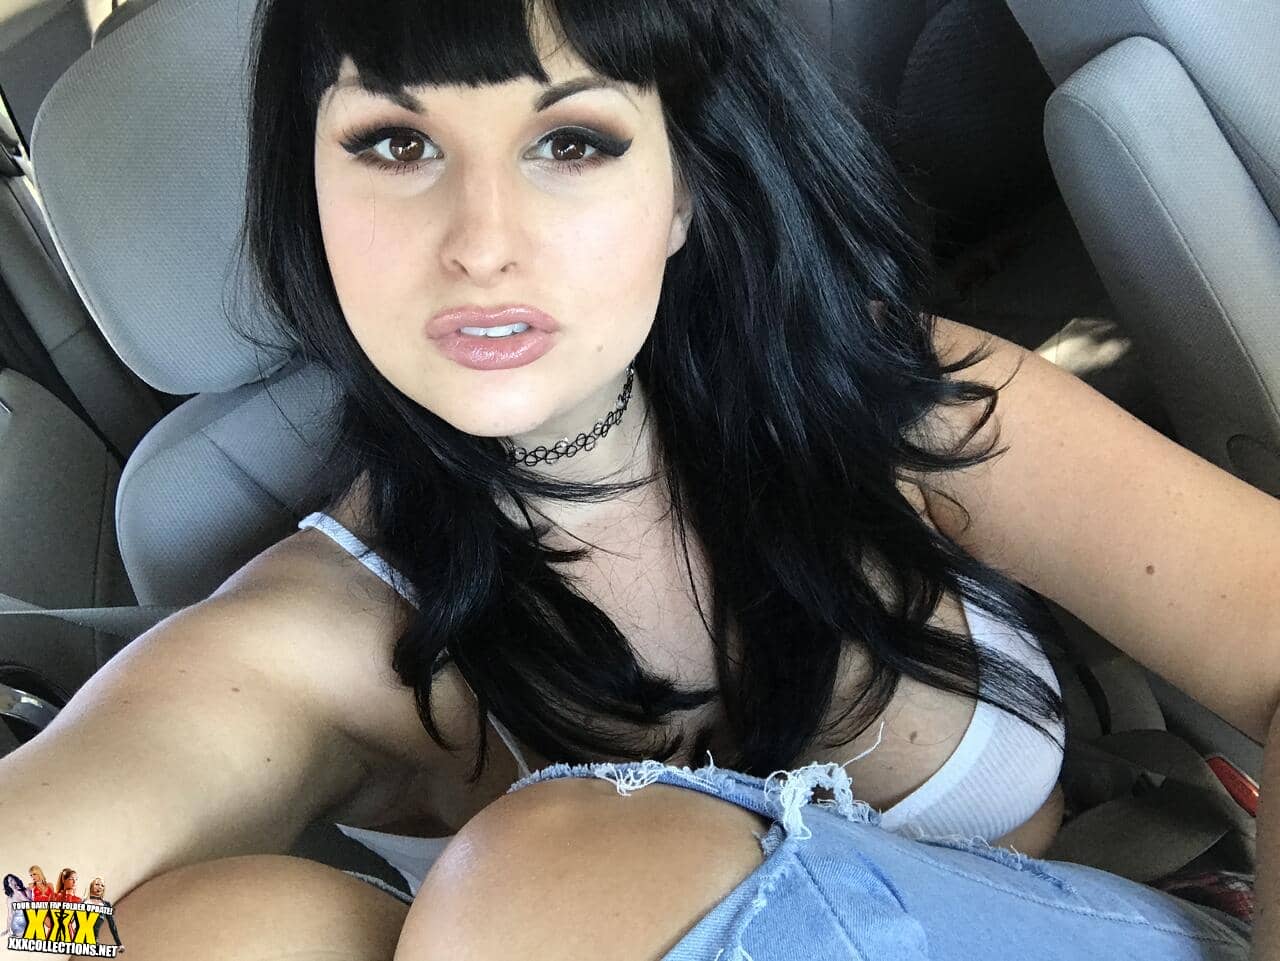 Only fans bailey jay